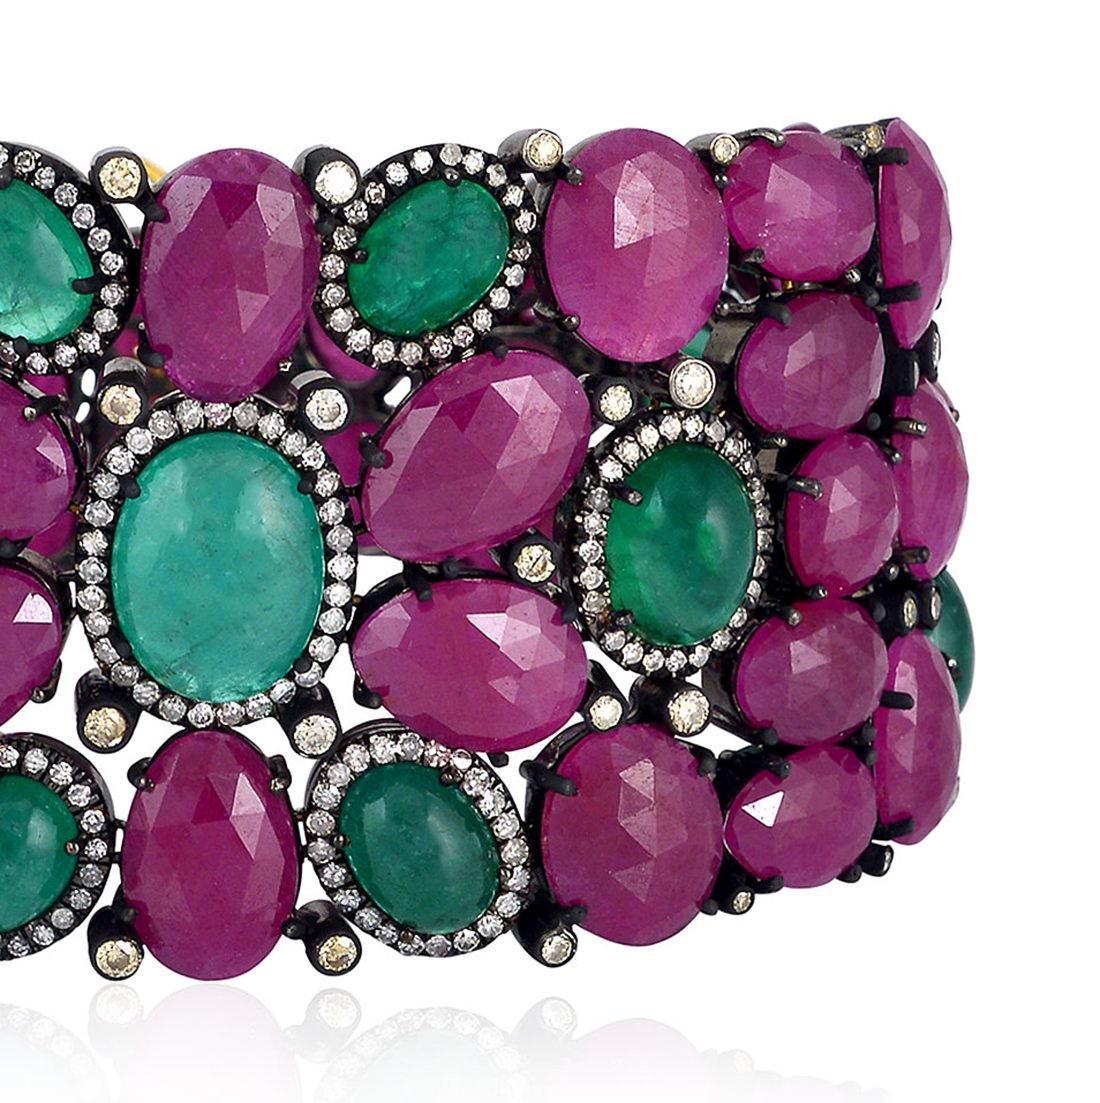 Baroque 139 Carats Natural Ruby Emerald & Diamond Bracelet 18k Gold & Silver For Sale 5